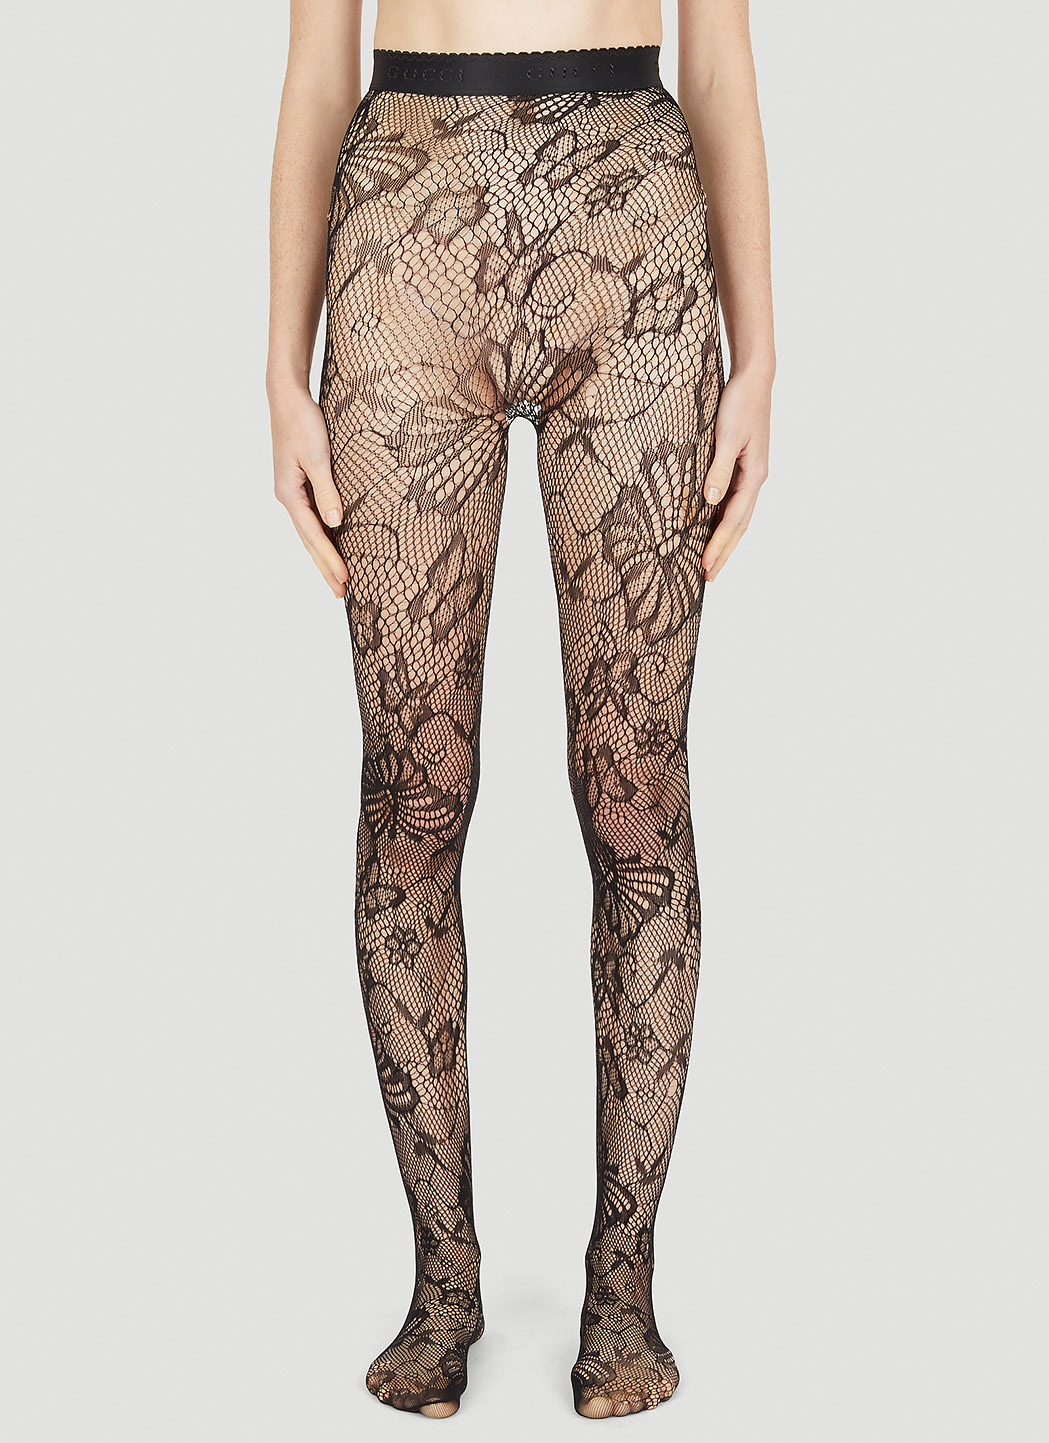 Butterfly Motif Tights